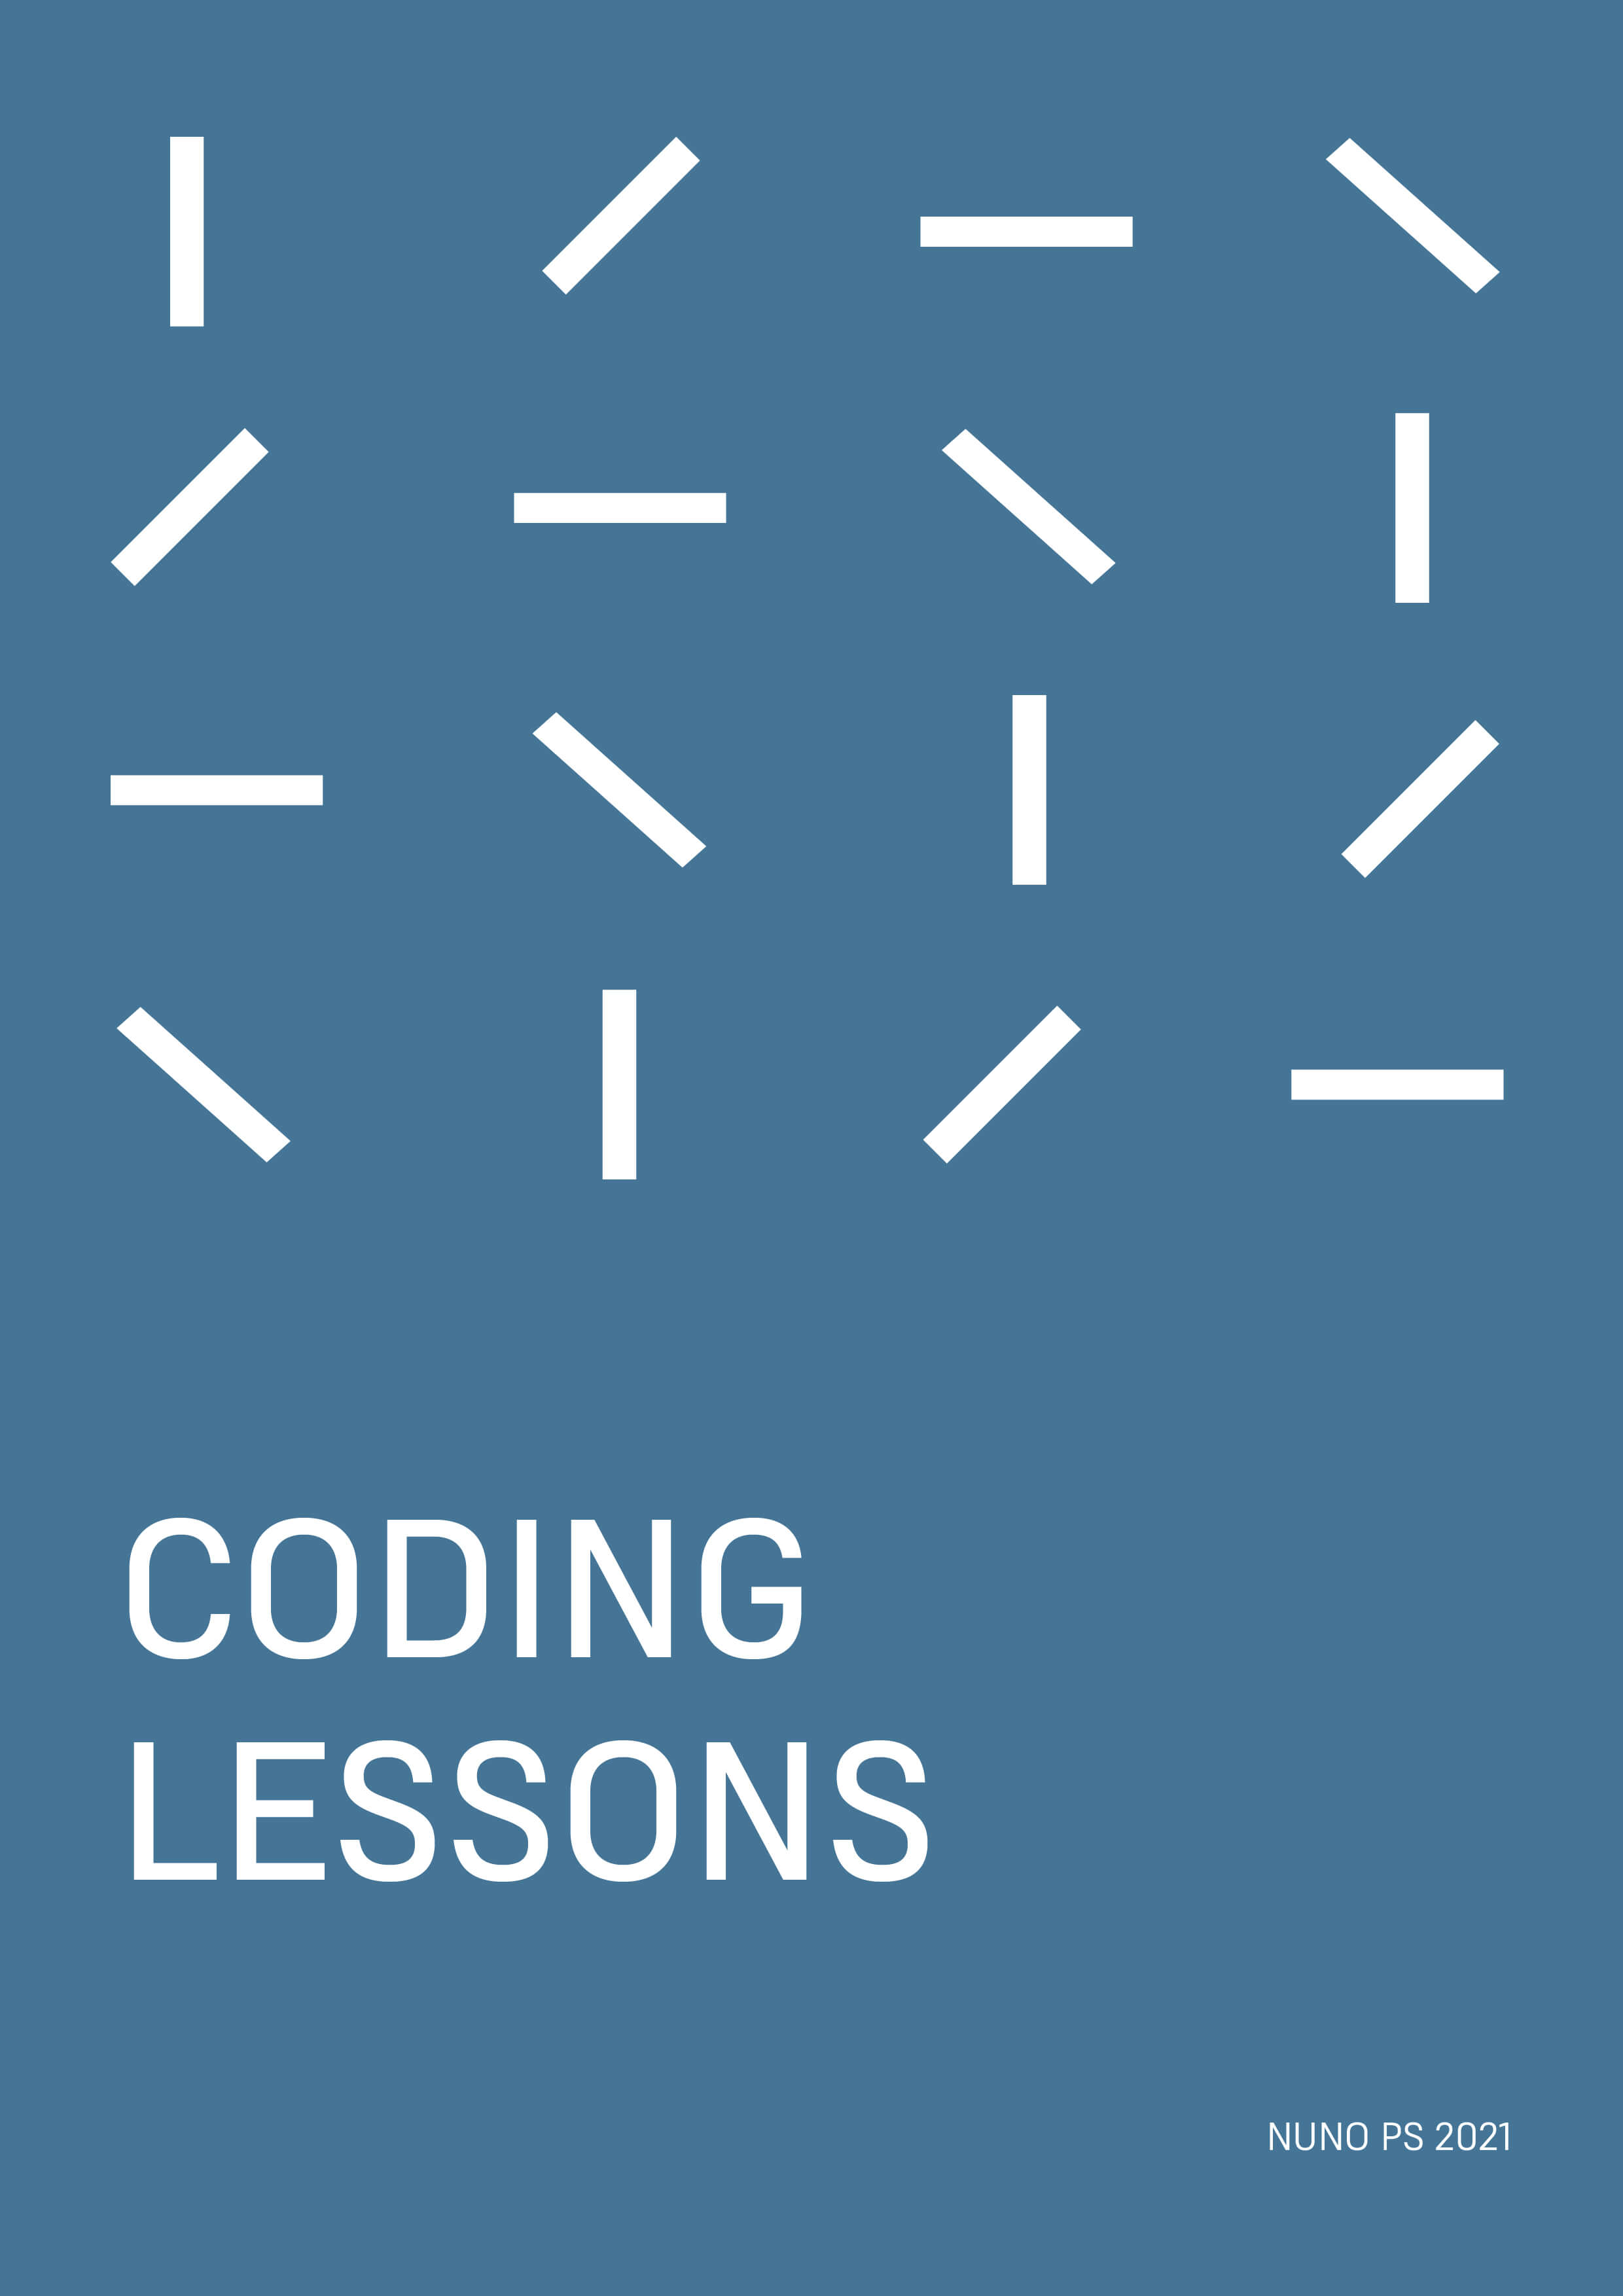 Coding Lessons image